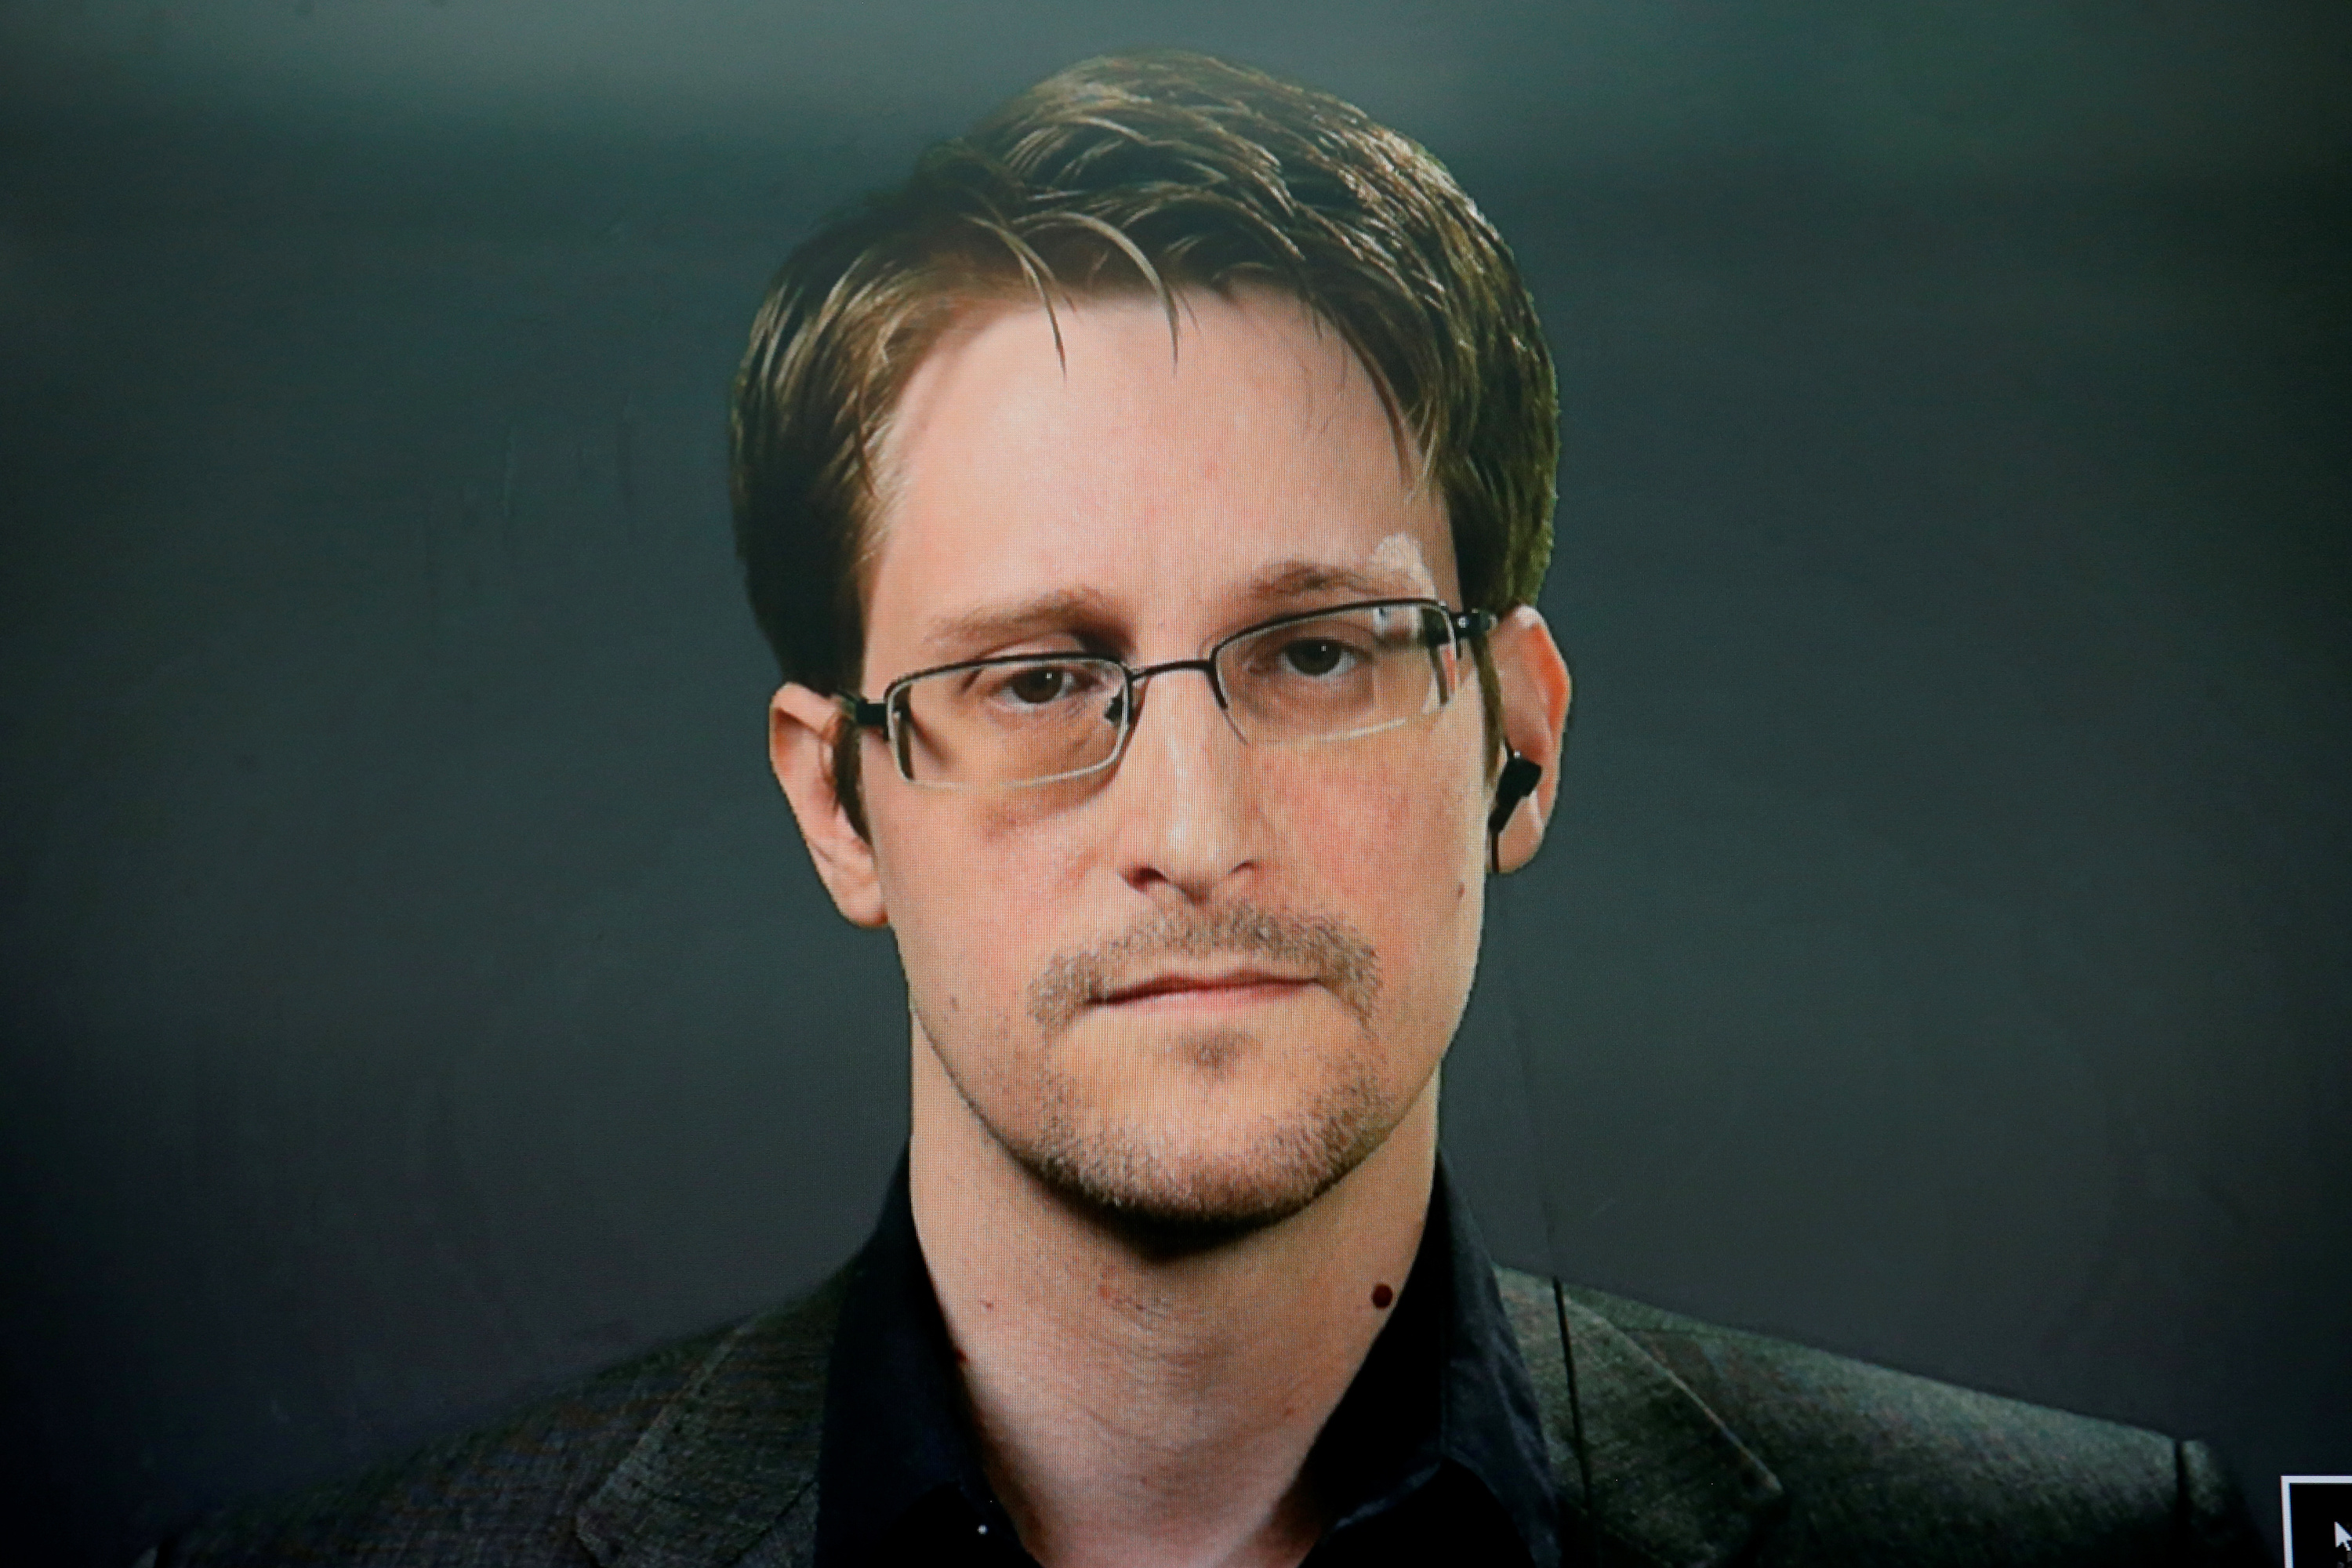 Edward Snowden speaks remotely during a news conference in New York City on September 14, 2016.